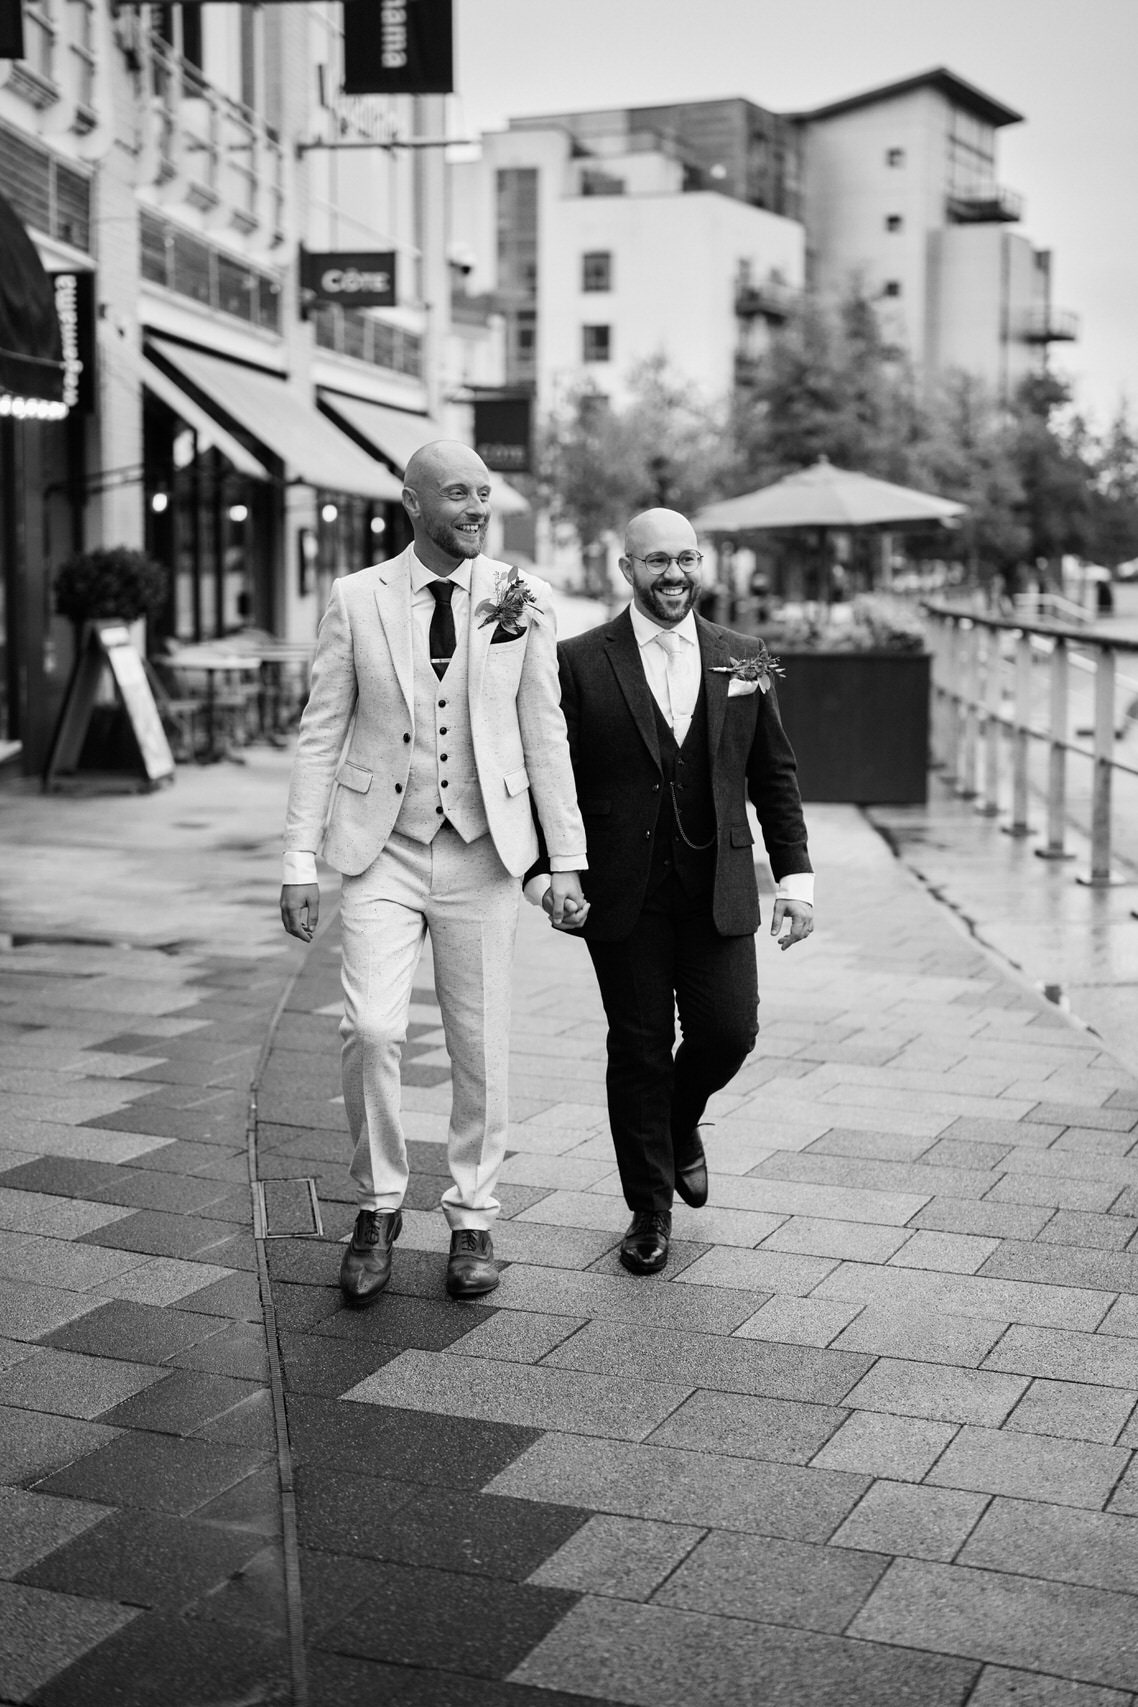 Two guys dressed in suits are strolling down the pavement.